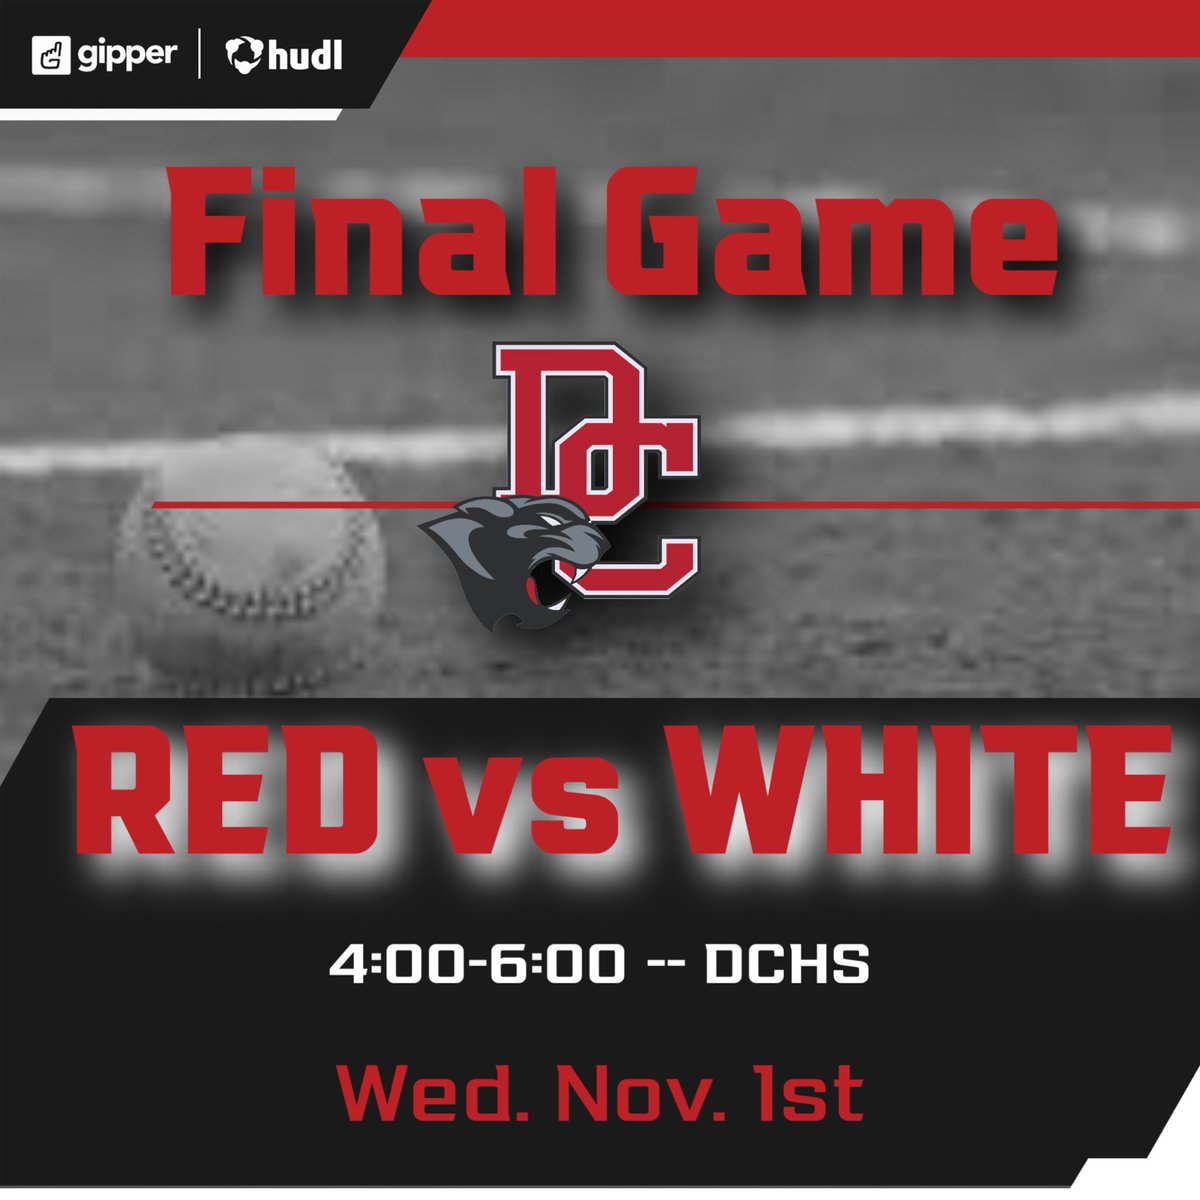 Dress warmly and watch the final game of ‘23 Red & White Series